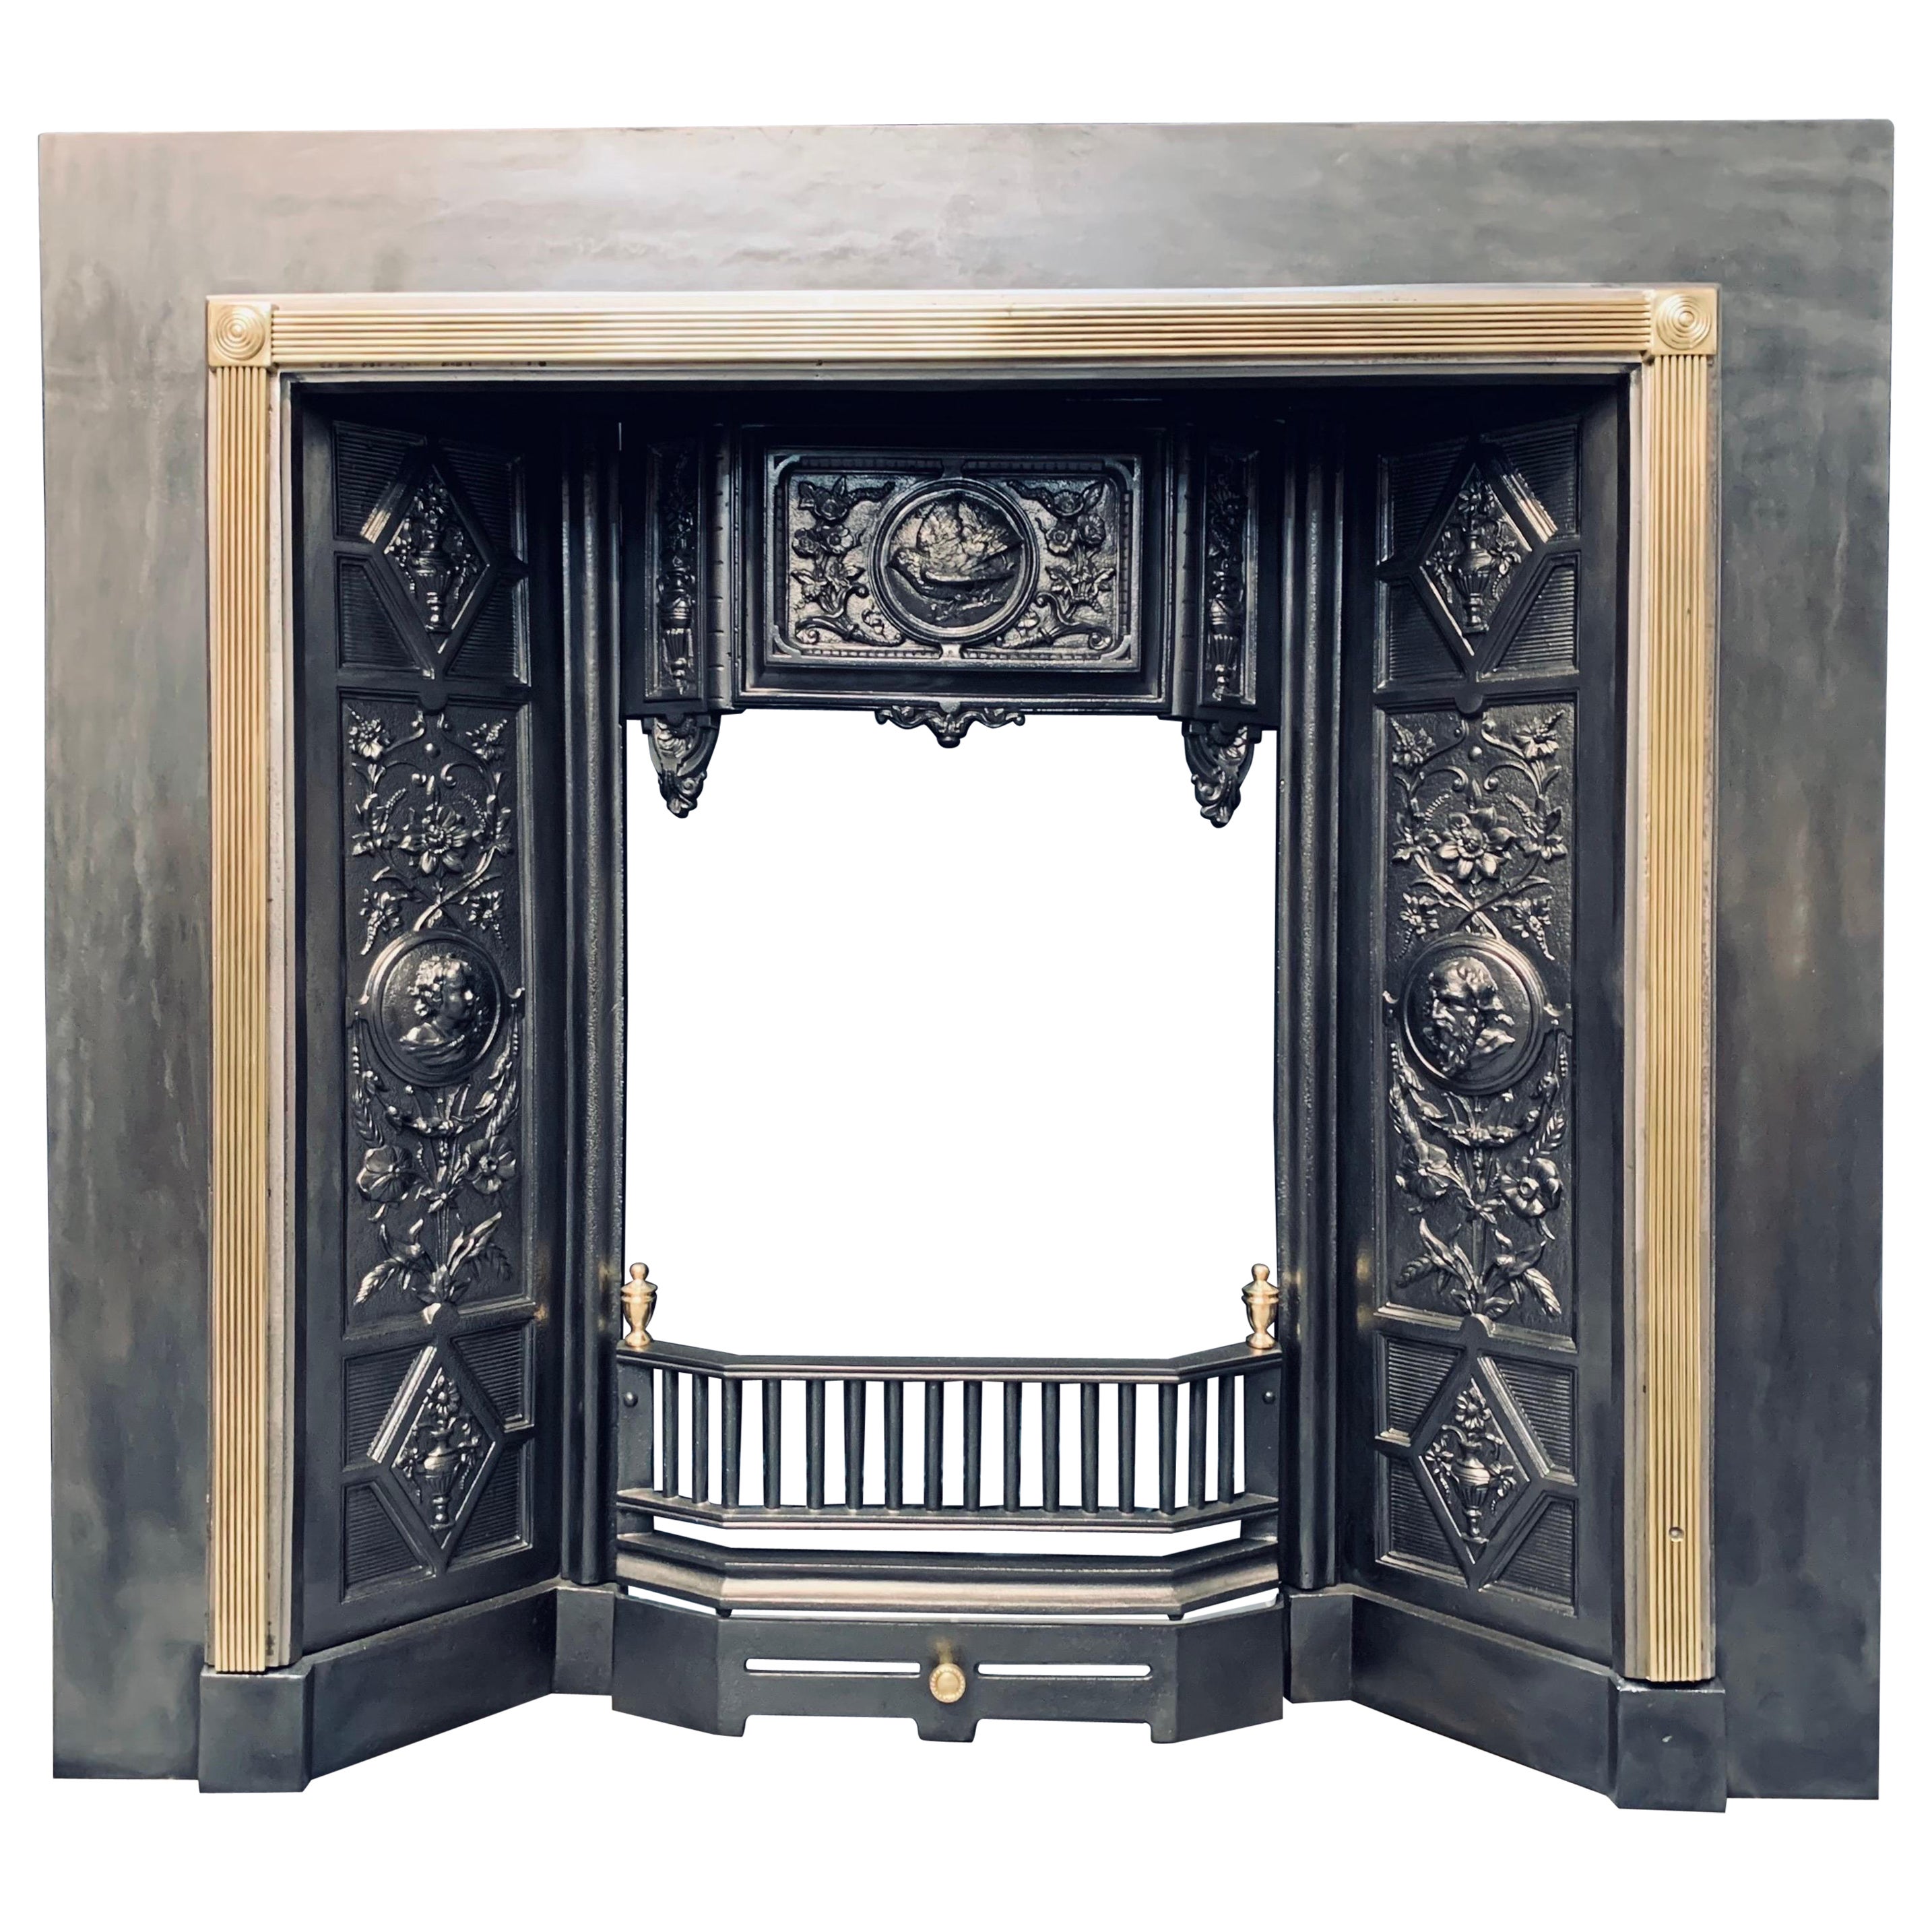 A large and Ornate 19th Century Victorian Scottish Cast Iron Fireplace Insert.  For Sale